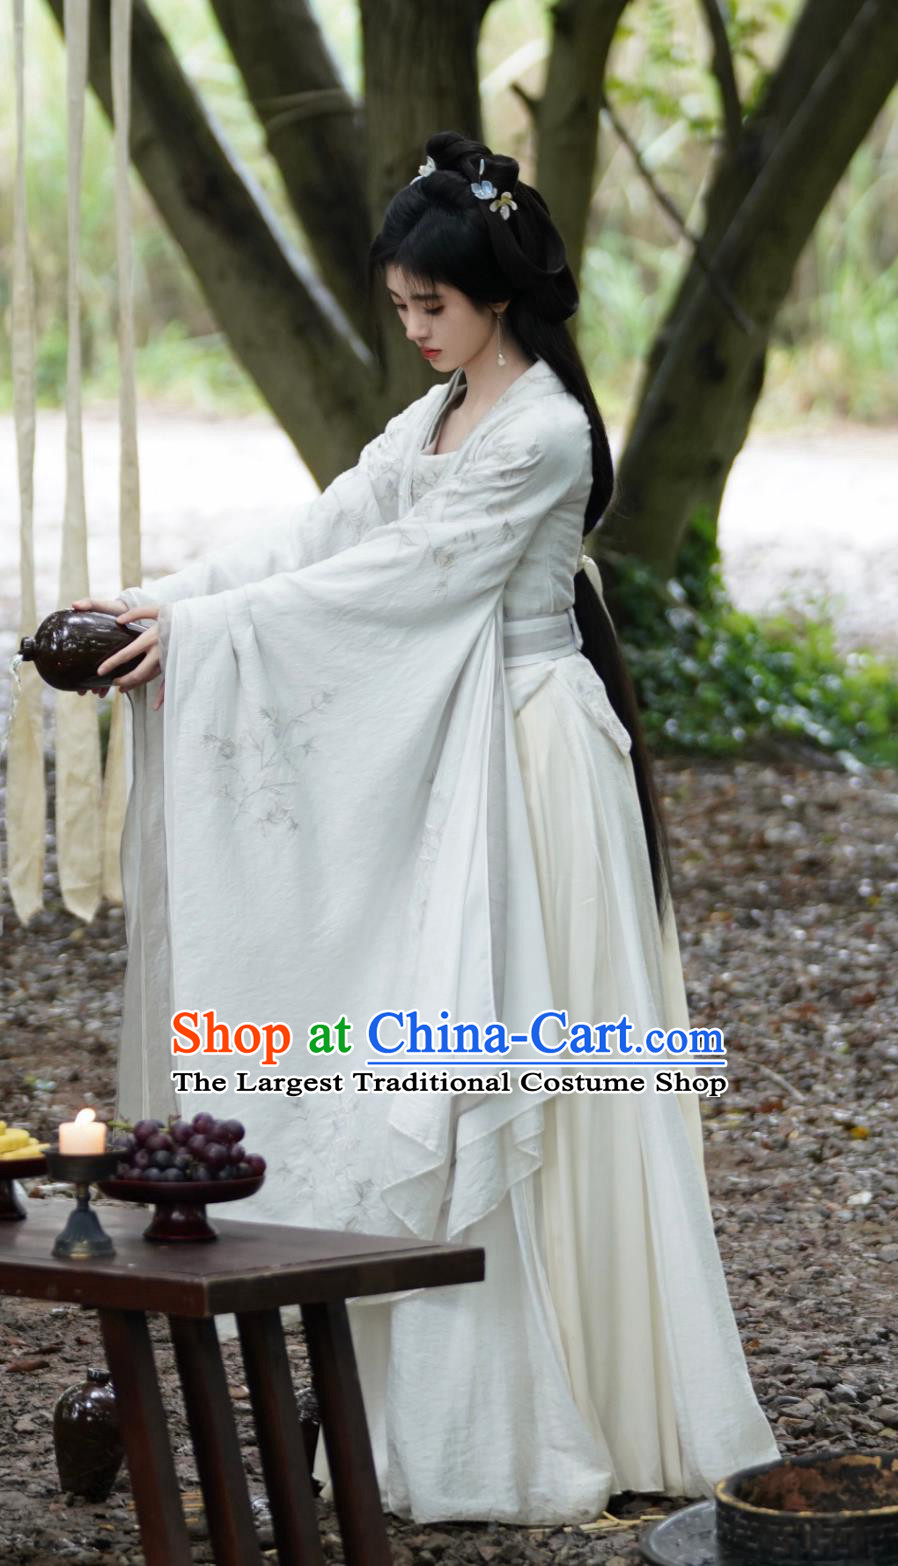 Traditional Hanfu Dress Chinese TV Series In Blossom Yang Cai Wei Costume Ancient China Noble Lady Clothing